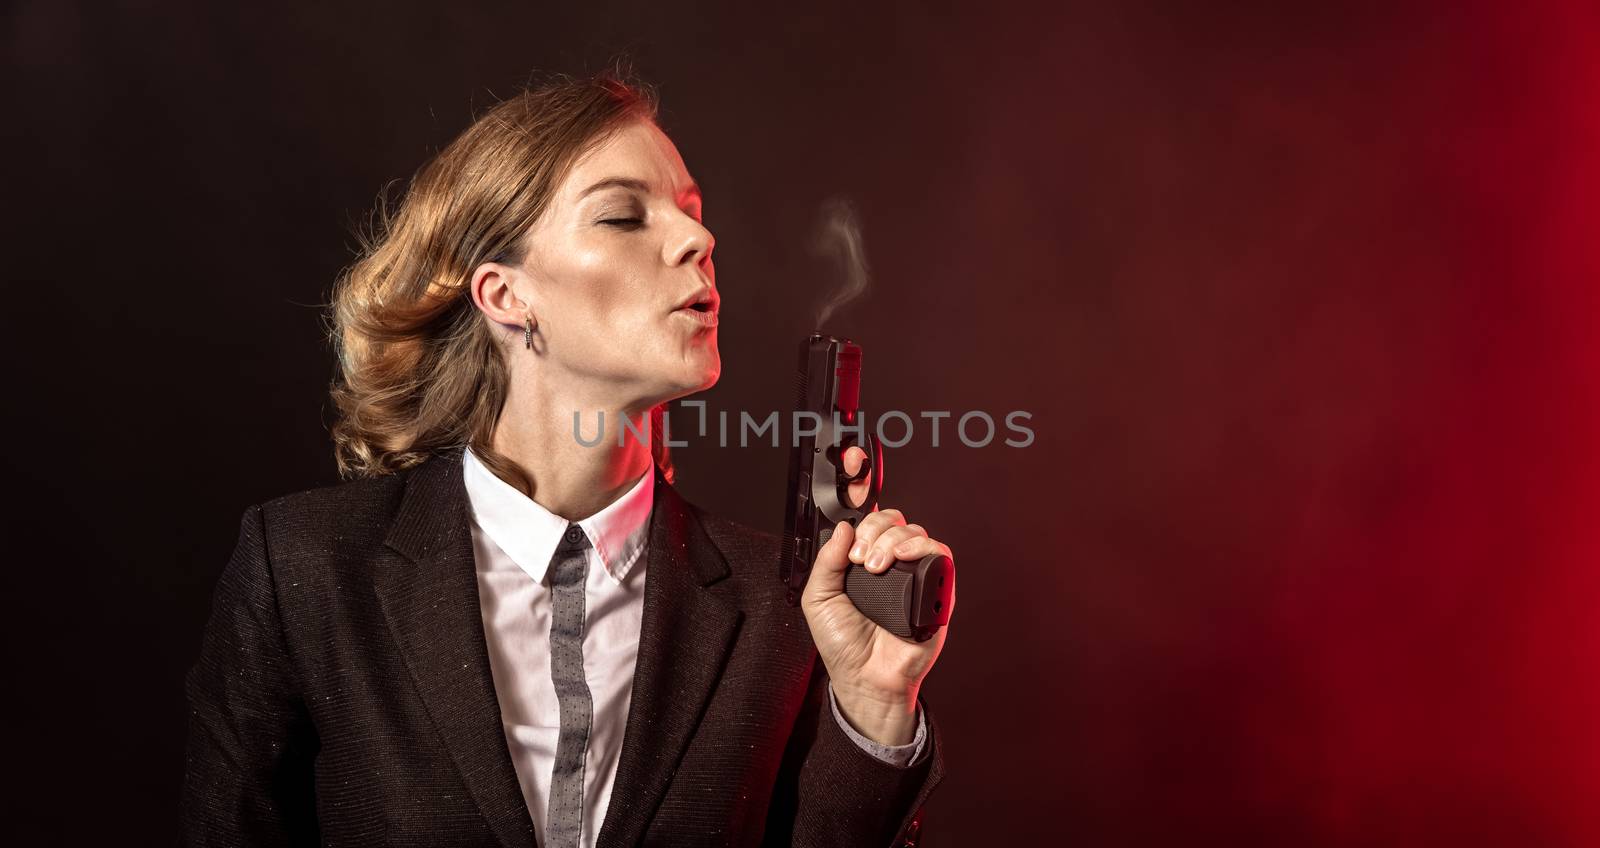 blowing smoke out of a gun after a shot. portret of a business woman on a dark background. banner with copy space.